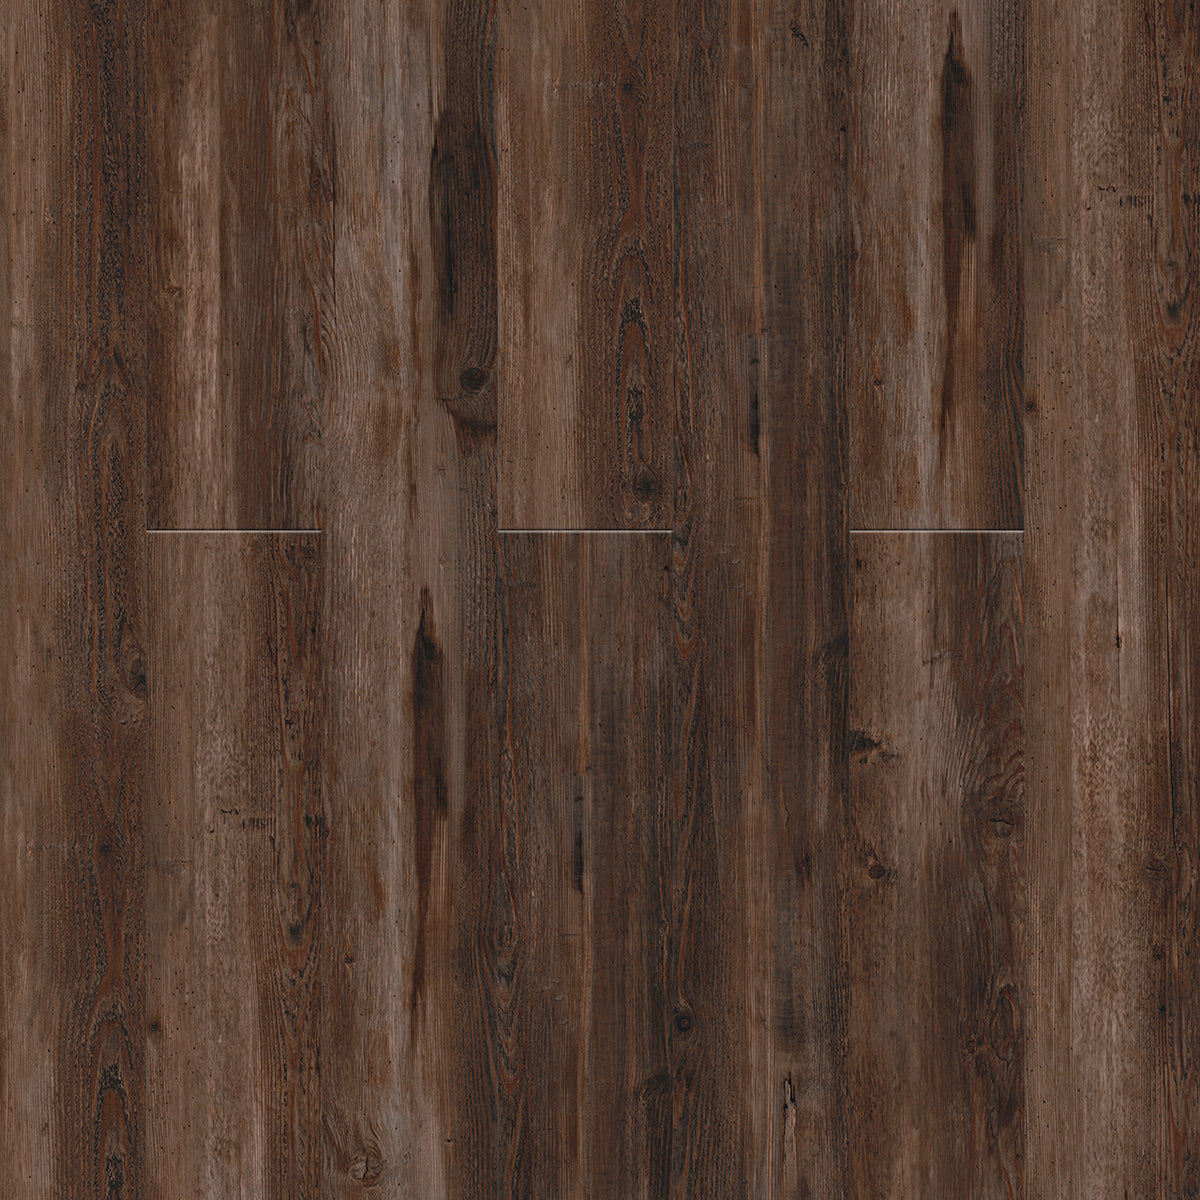 Engineered Floors - Ozark 2 Collection - 7 in. x 48 in. - Rustic Lodge